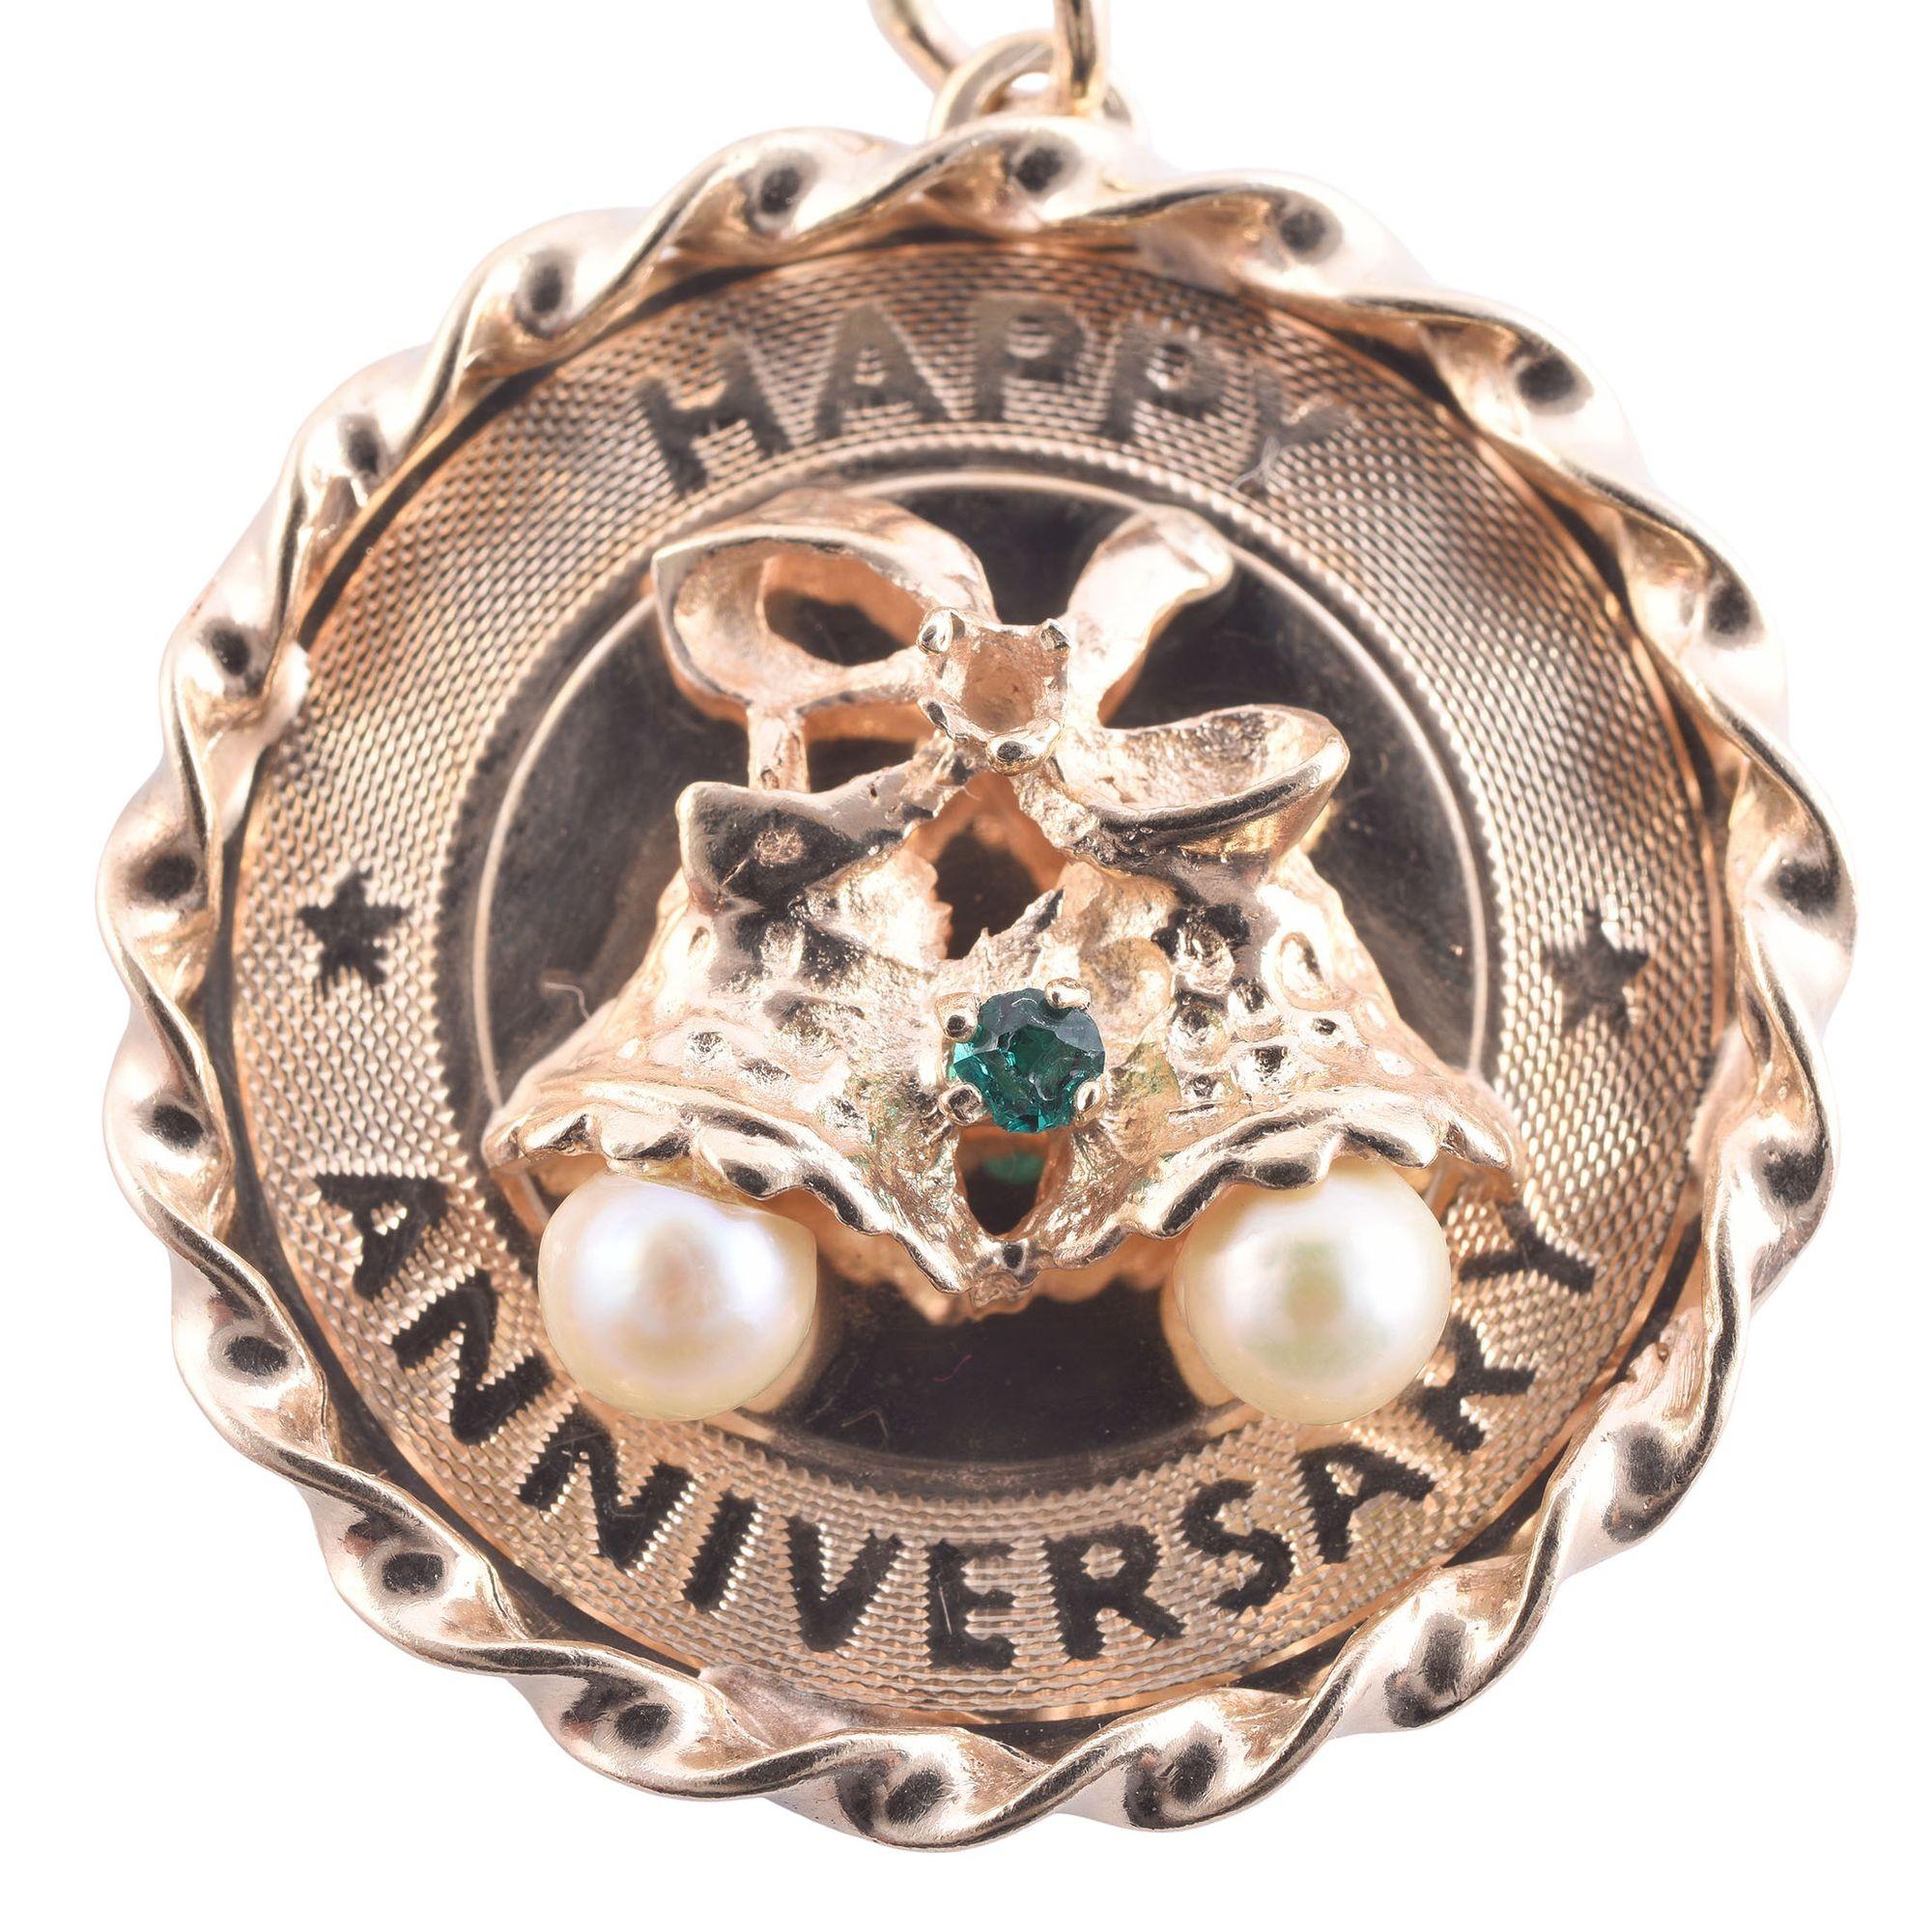 Vintage 14K Happy Anniversary Pendant or Charm, circa 1950. This round vintage charm is crafted in 14 karat yellow gold and features pearls. [KIMH 544]
Dimensions
26mm diameter x 5mm D